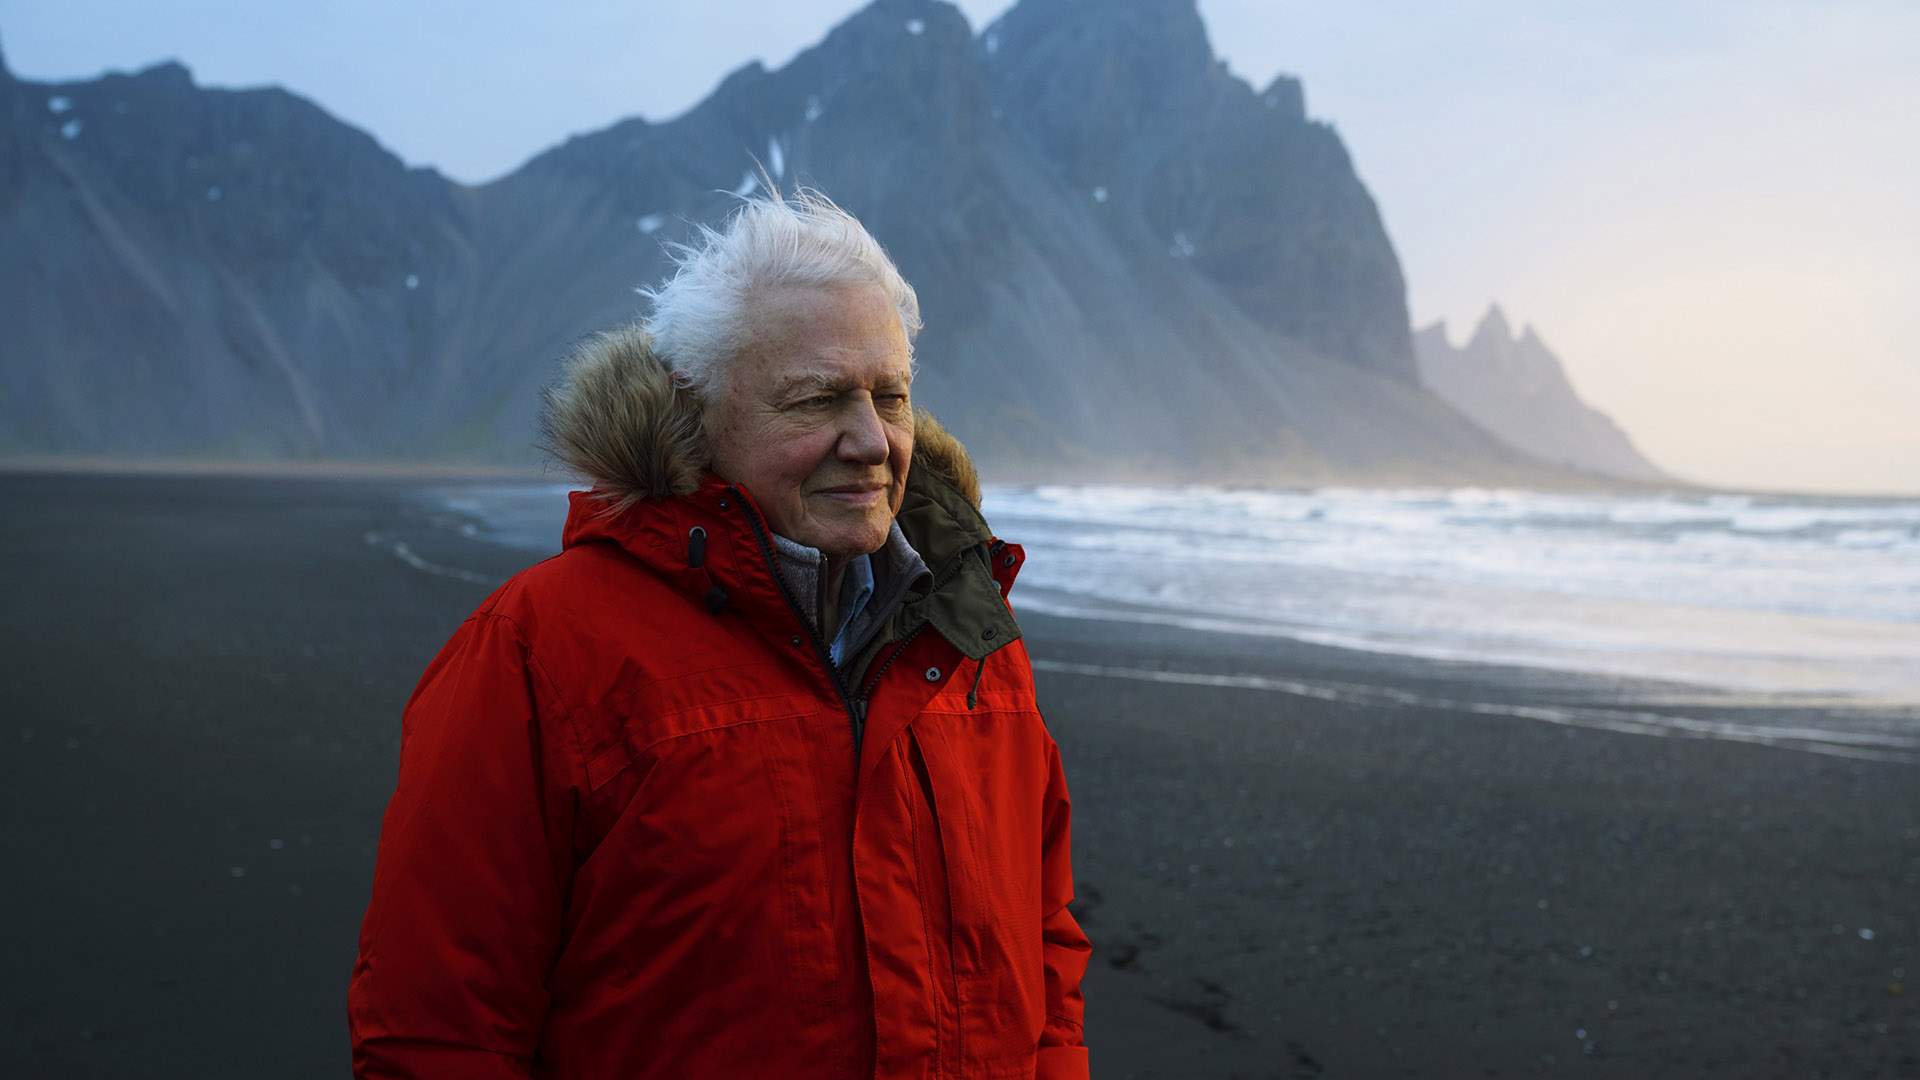 Check Out the Scenic Trailer for David Attenborough's New 'Seven Worlds, One Planet' Series